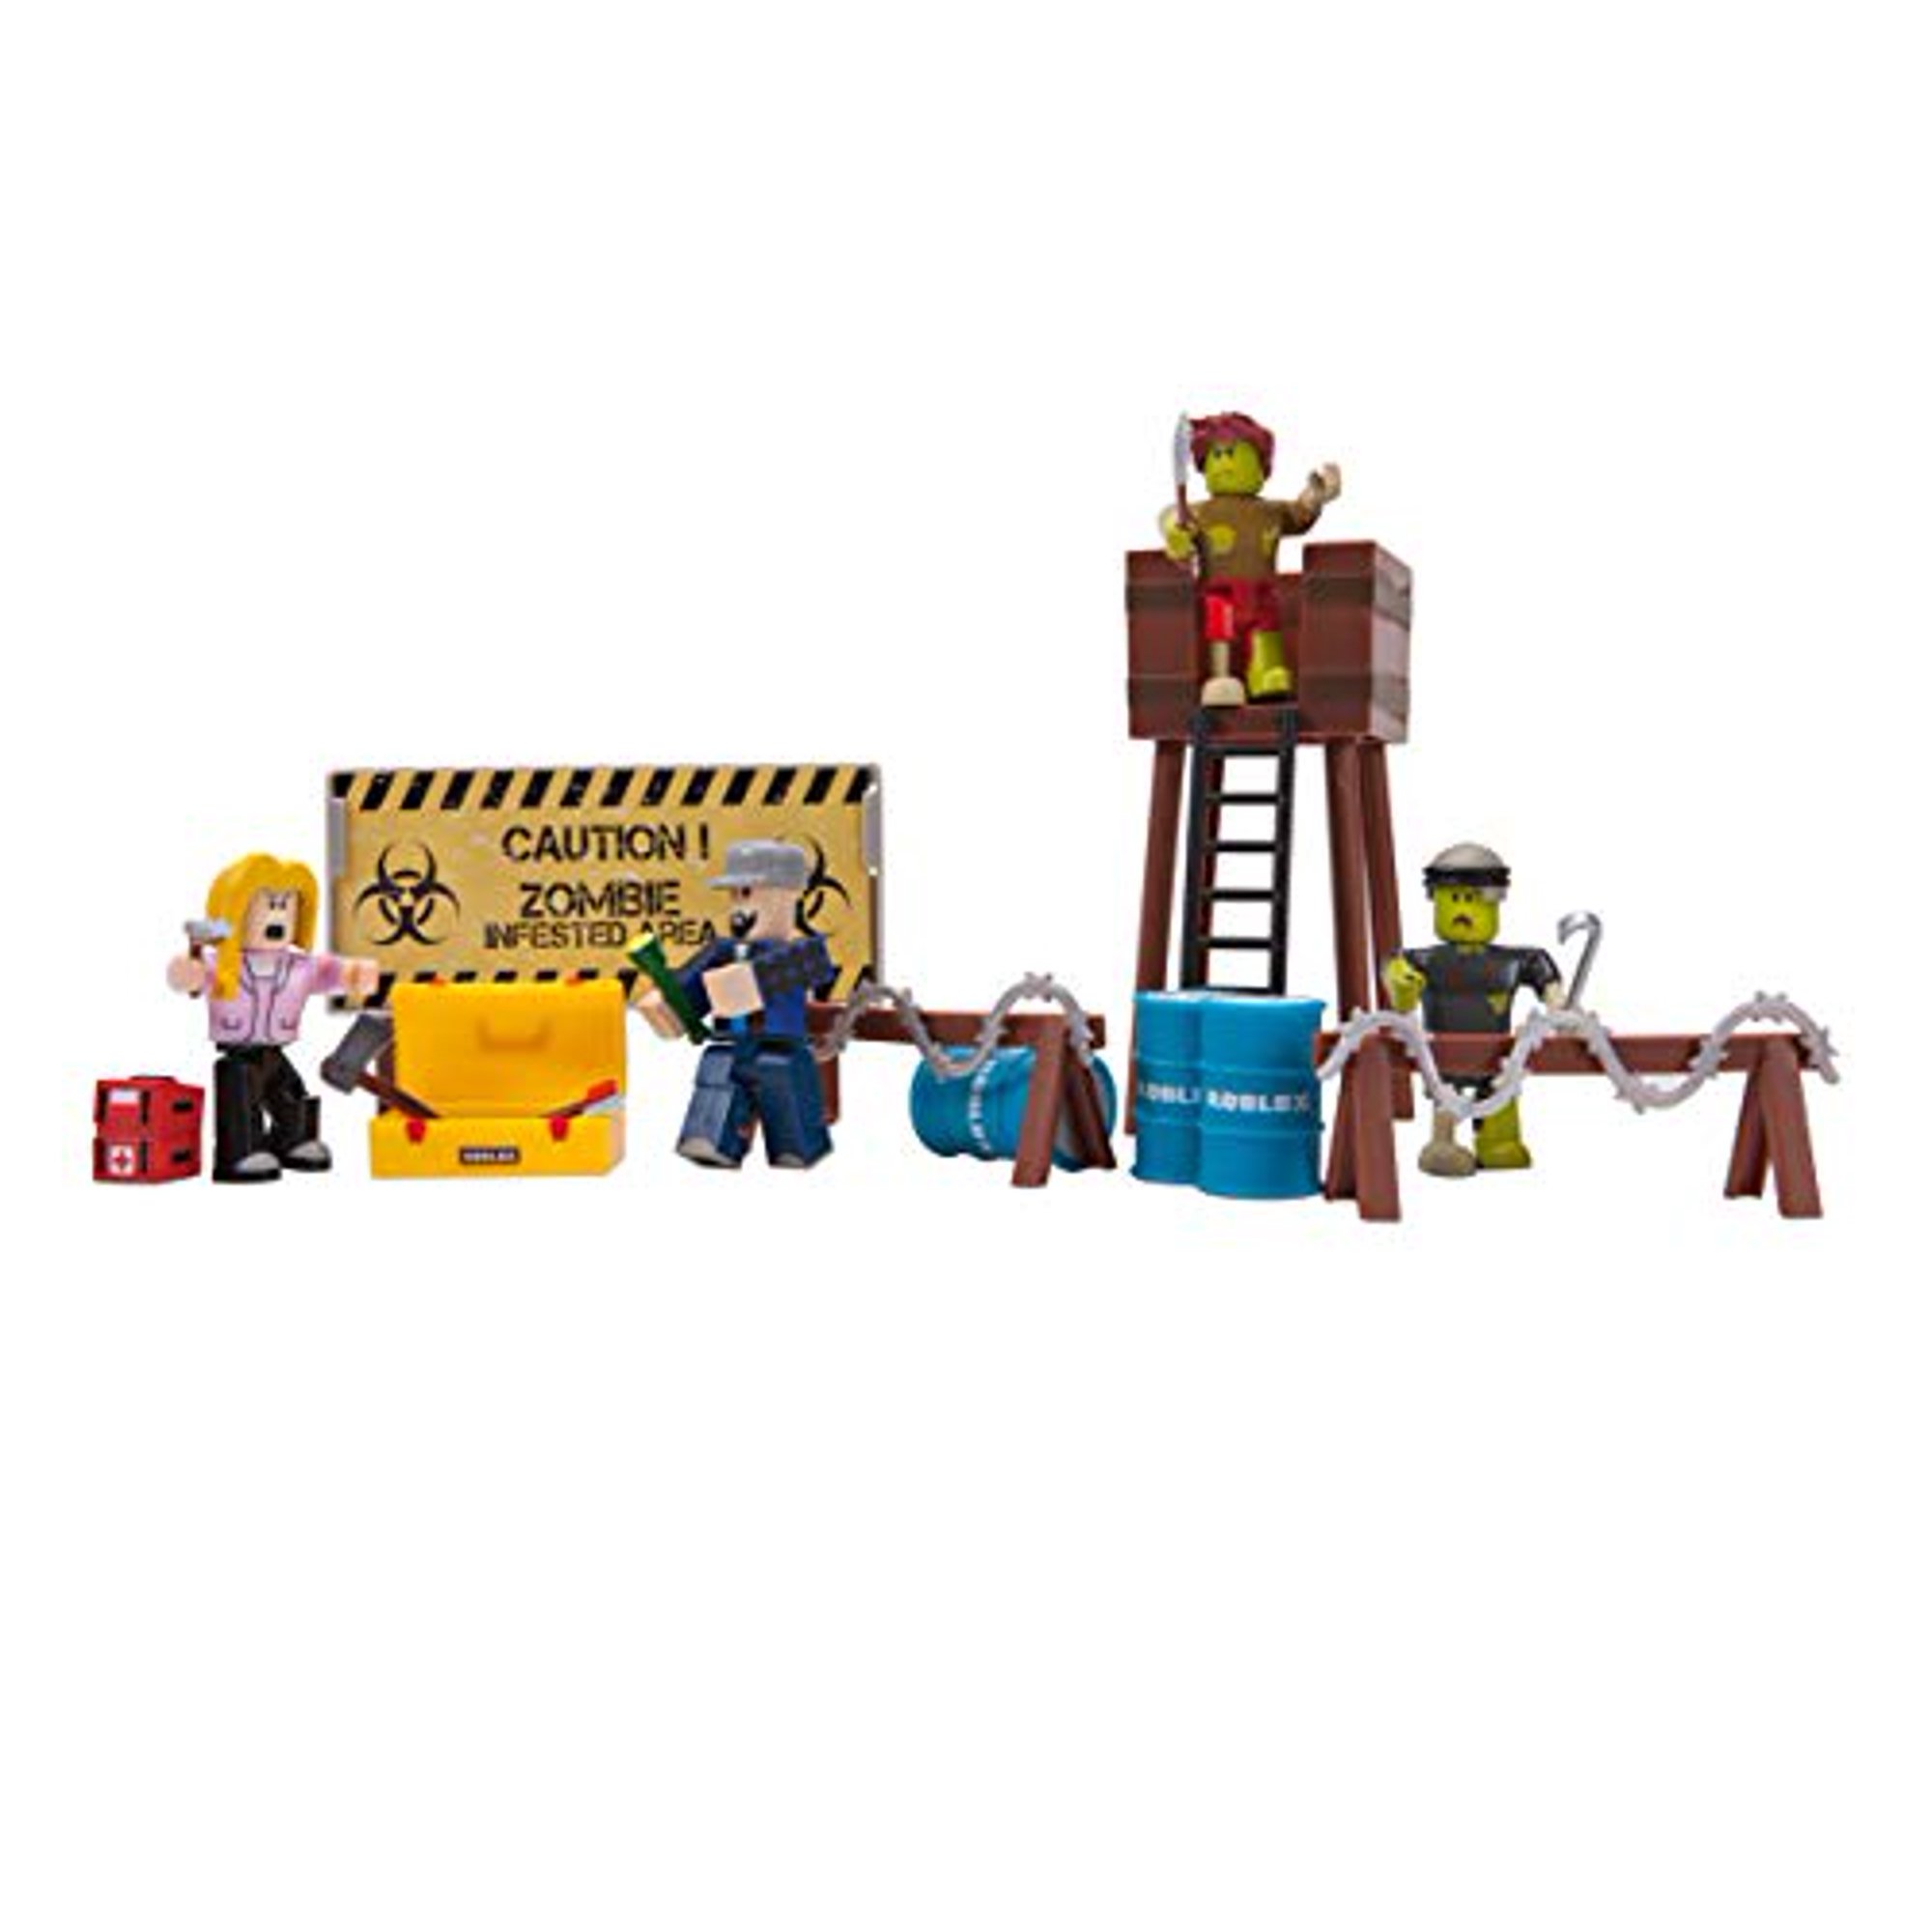 Roblox Zombie Attack Playset Walmart Canada - zombie attack roblox thumbnail